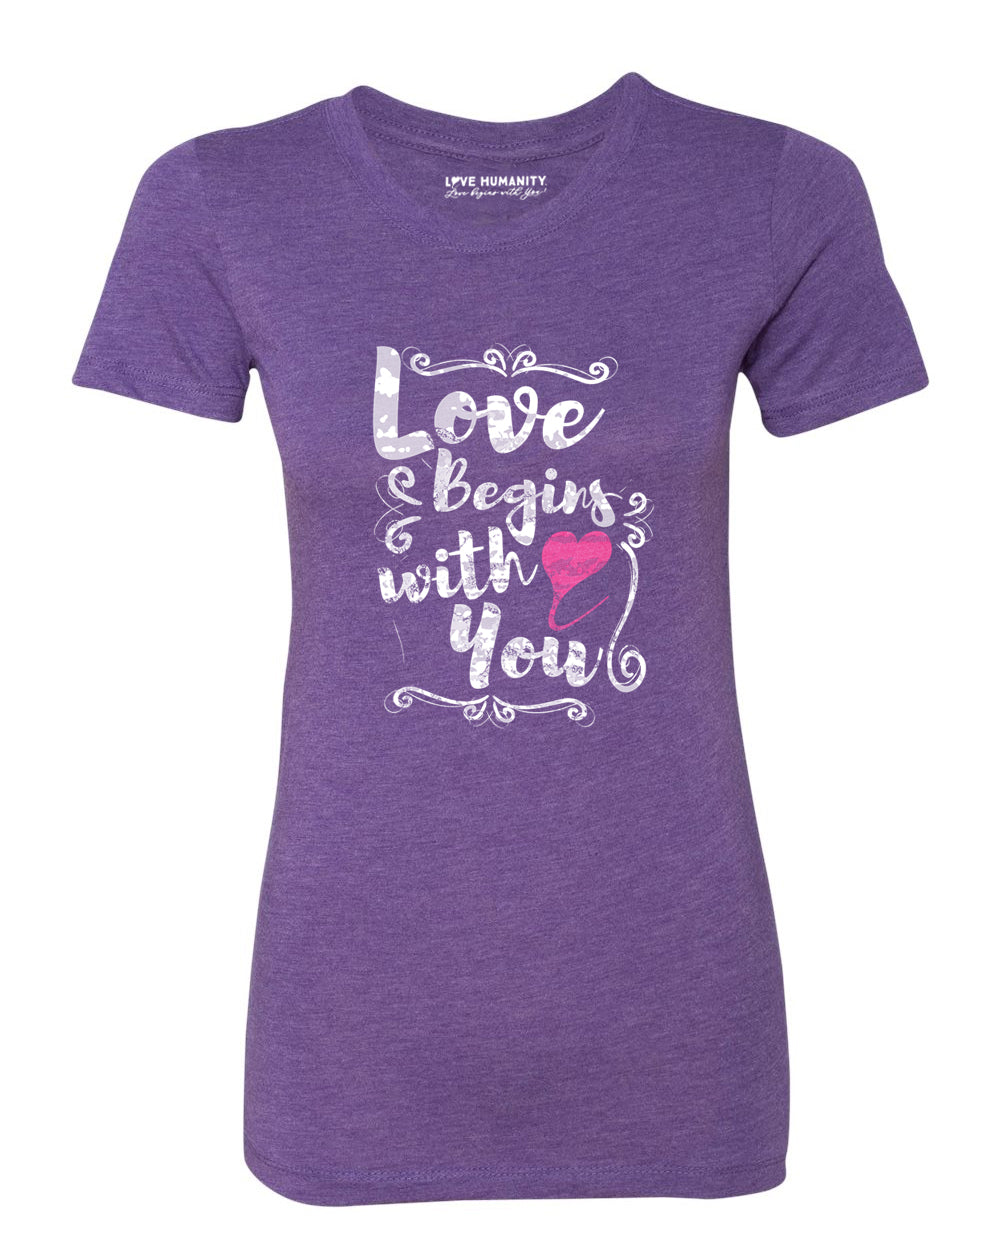 Love Begins With You™ Women's Premium TriBlend T